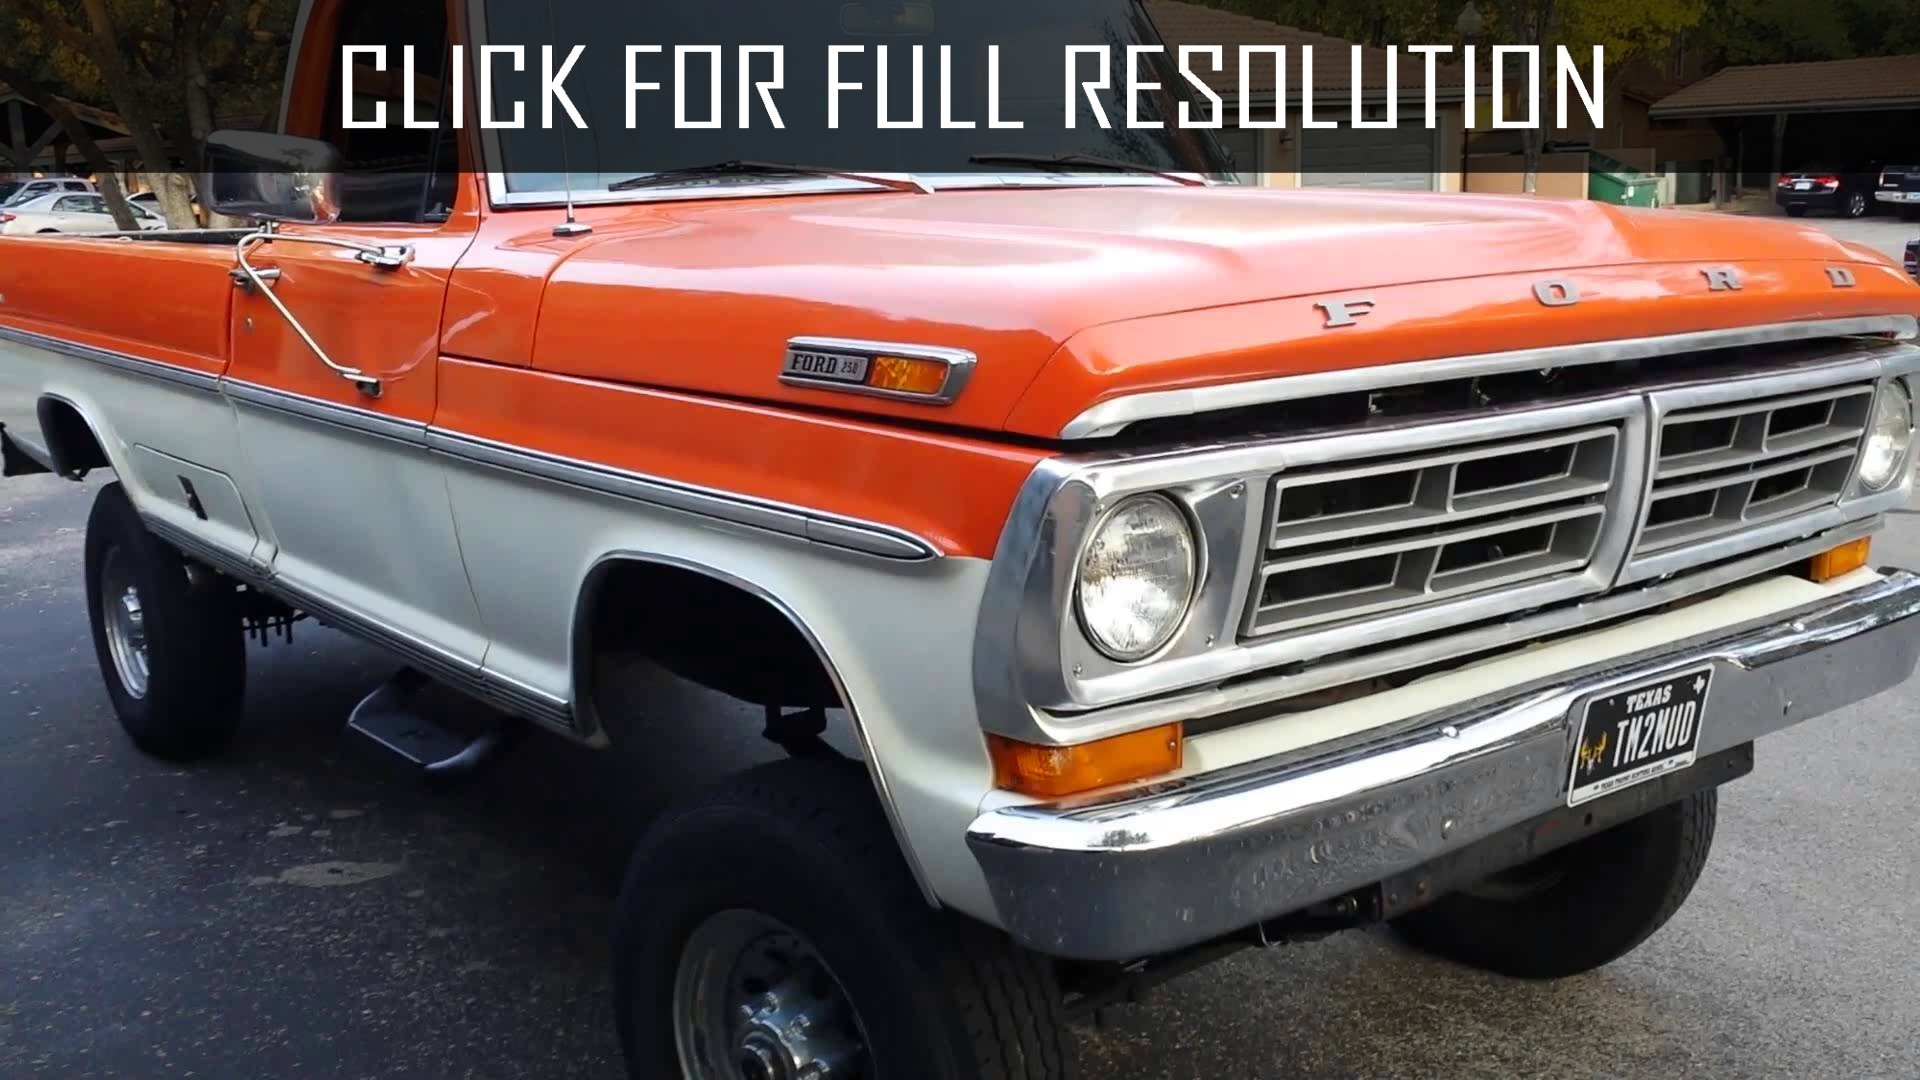 1972 Ford F250 4x4